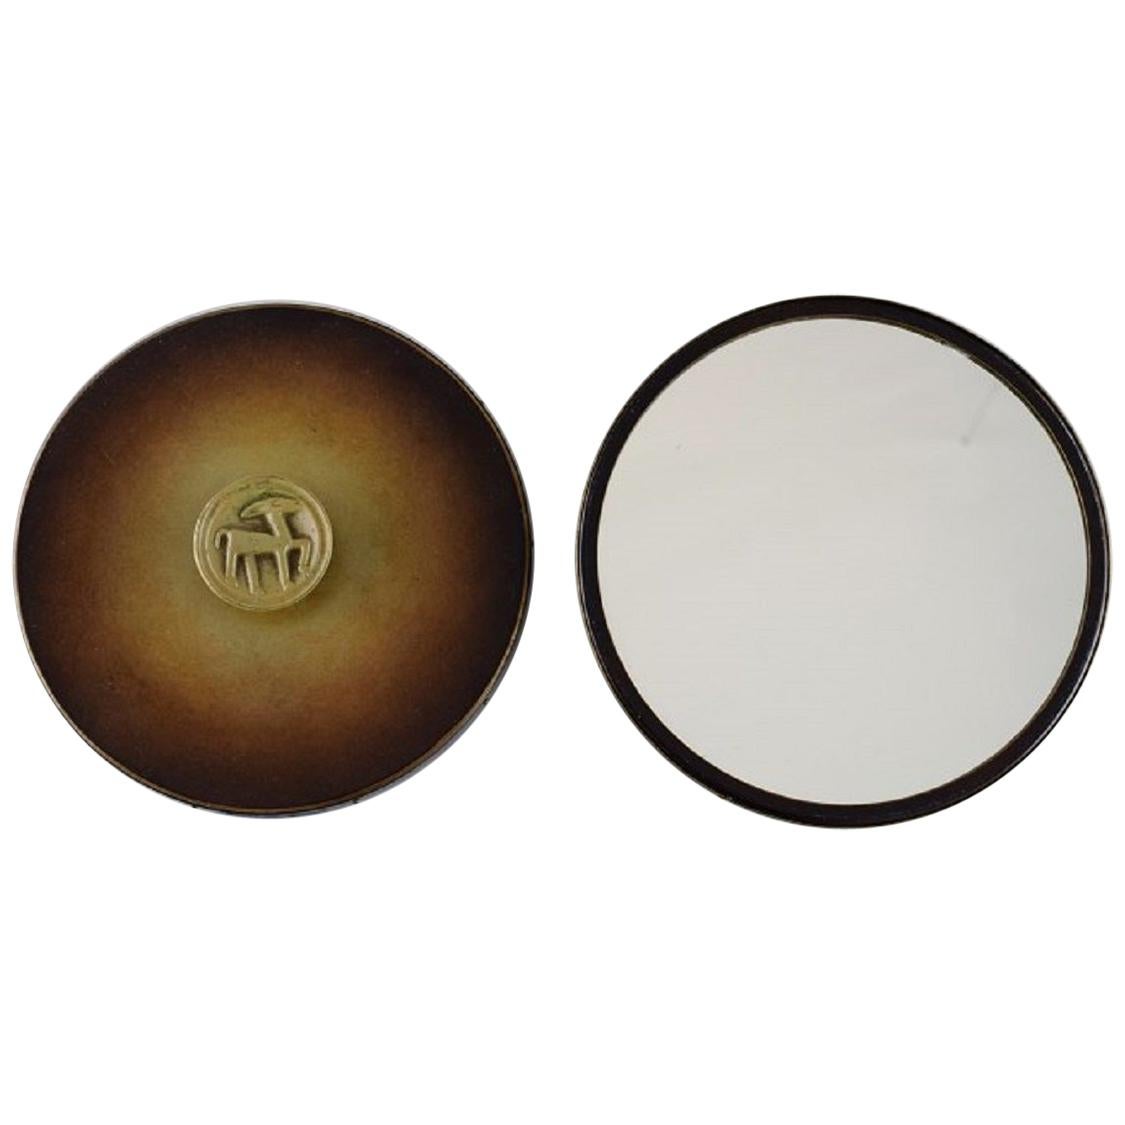 Hans Bergström for Ystad Brons, a Pair of Art Deco Hand Mirrors in Bronze, 1940s For Sale